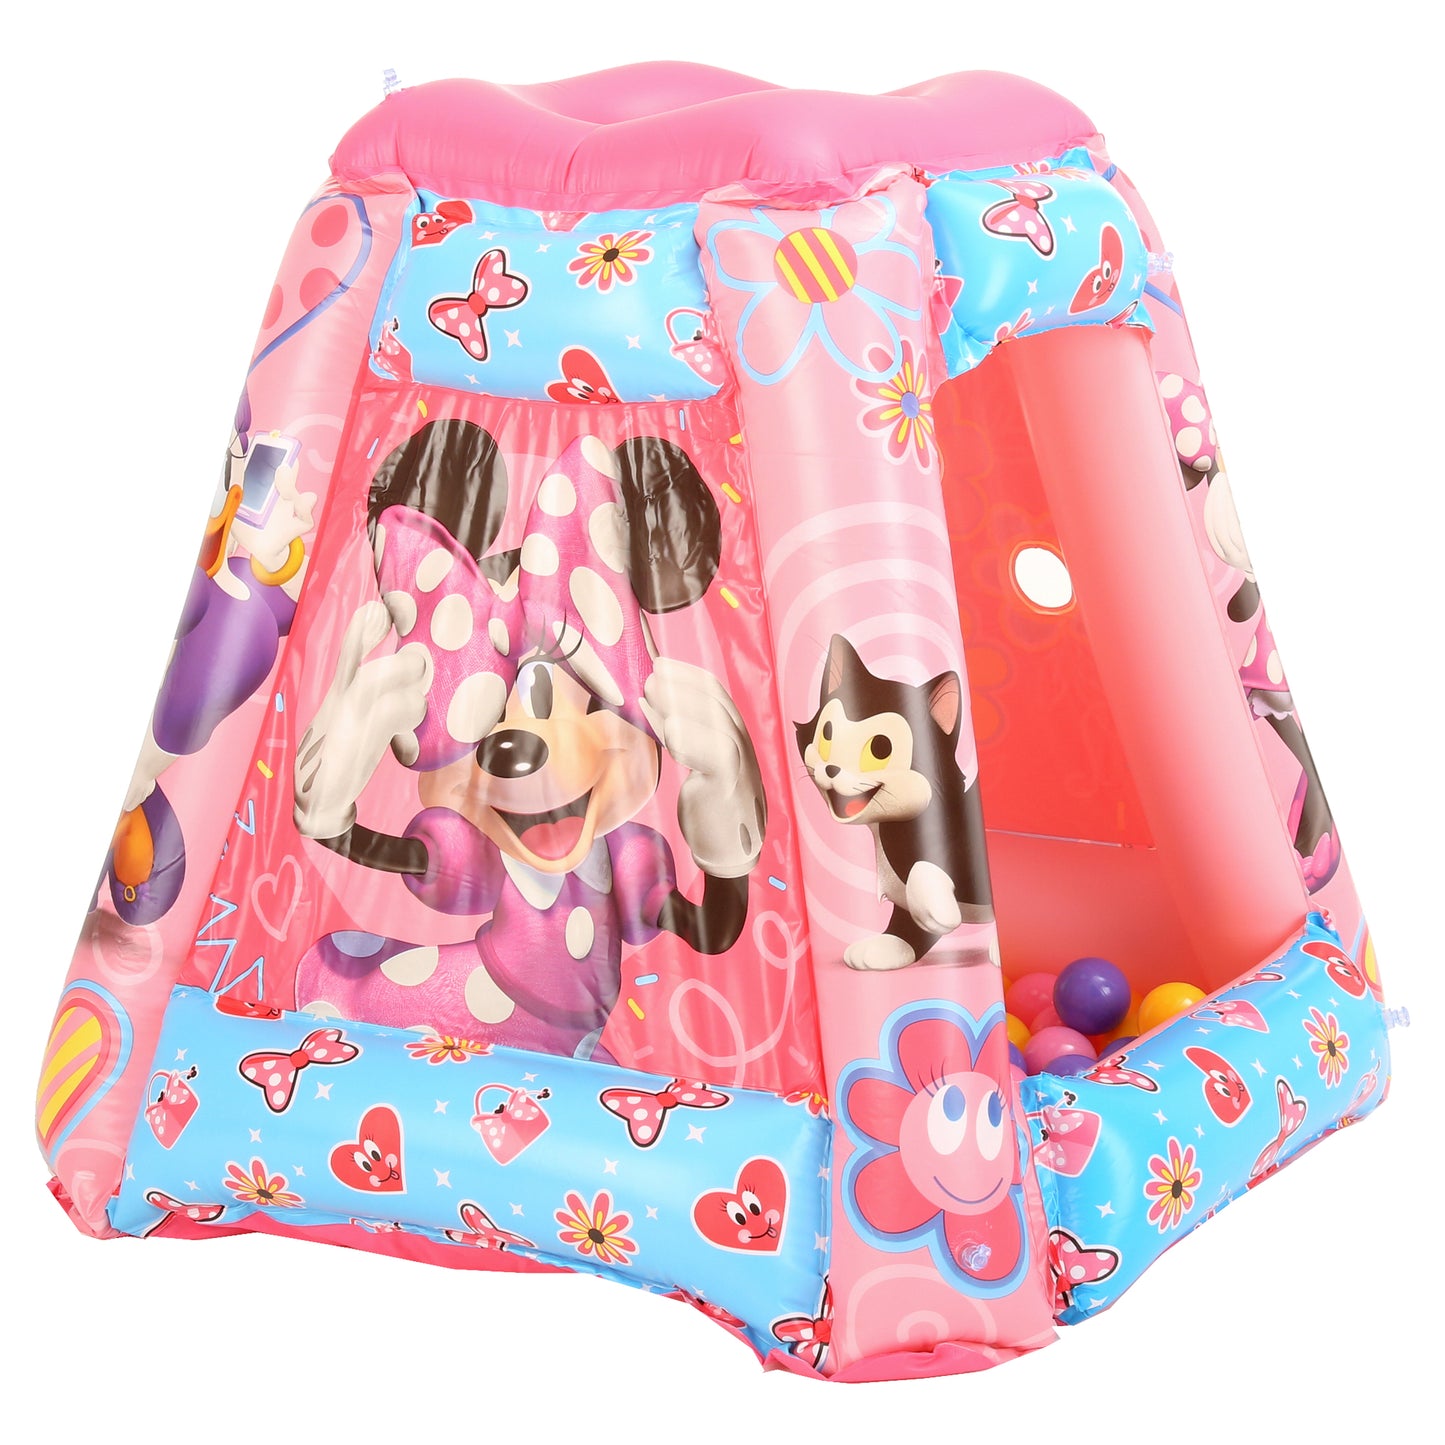 Disney Minnie Mouse Inflatable Playland, includes 100 Soft Flex Balls